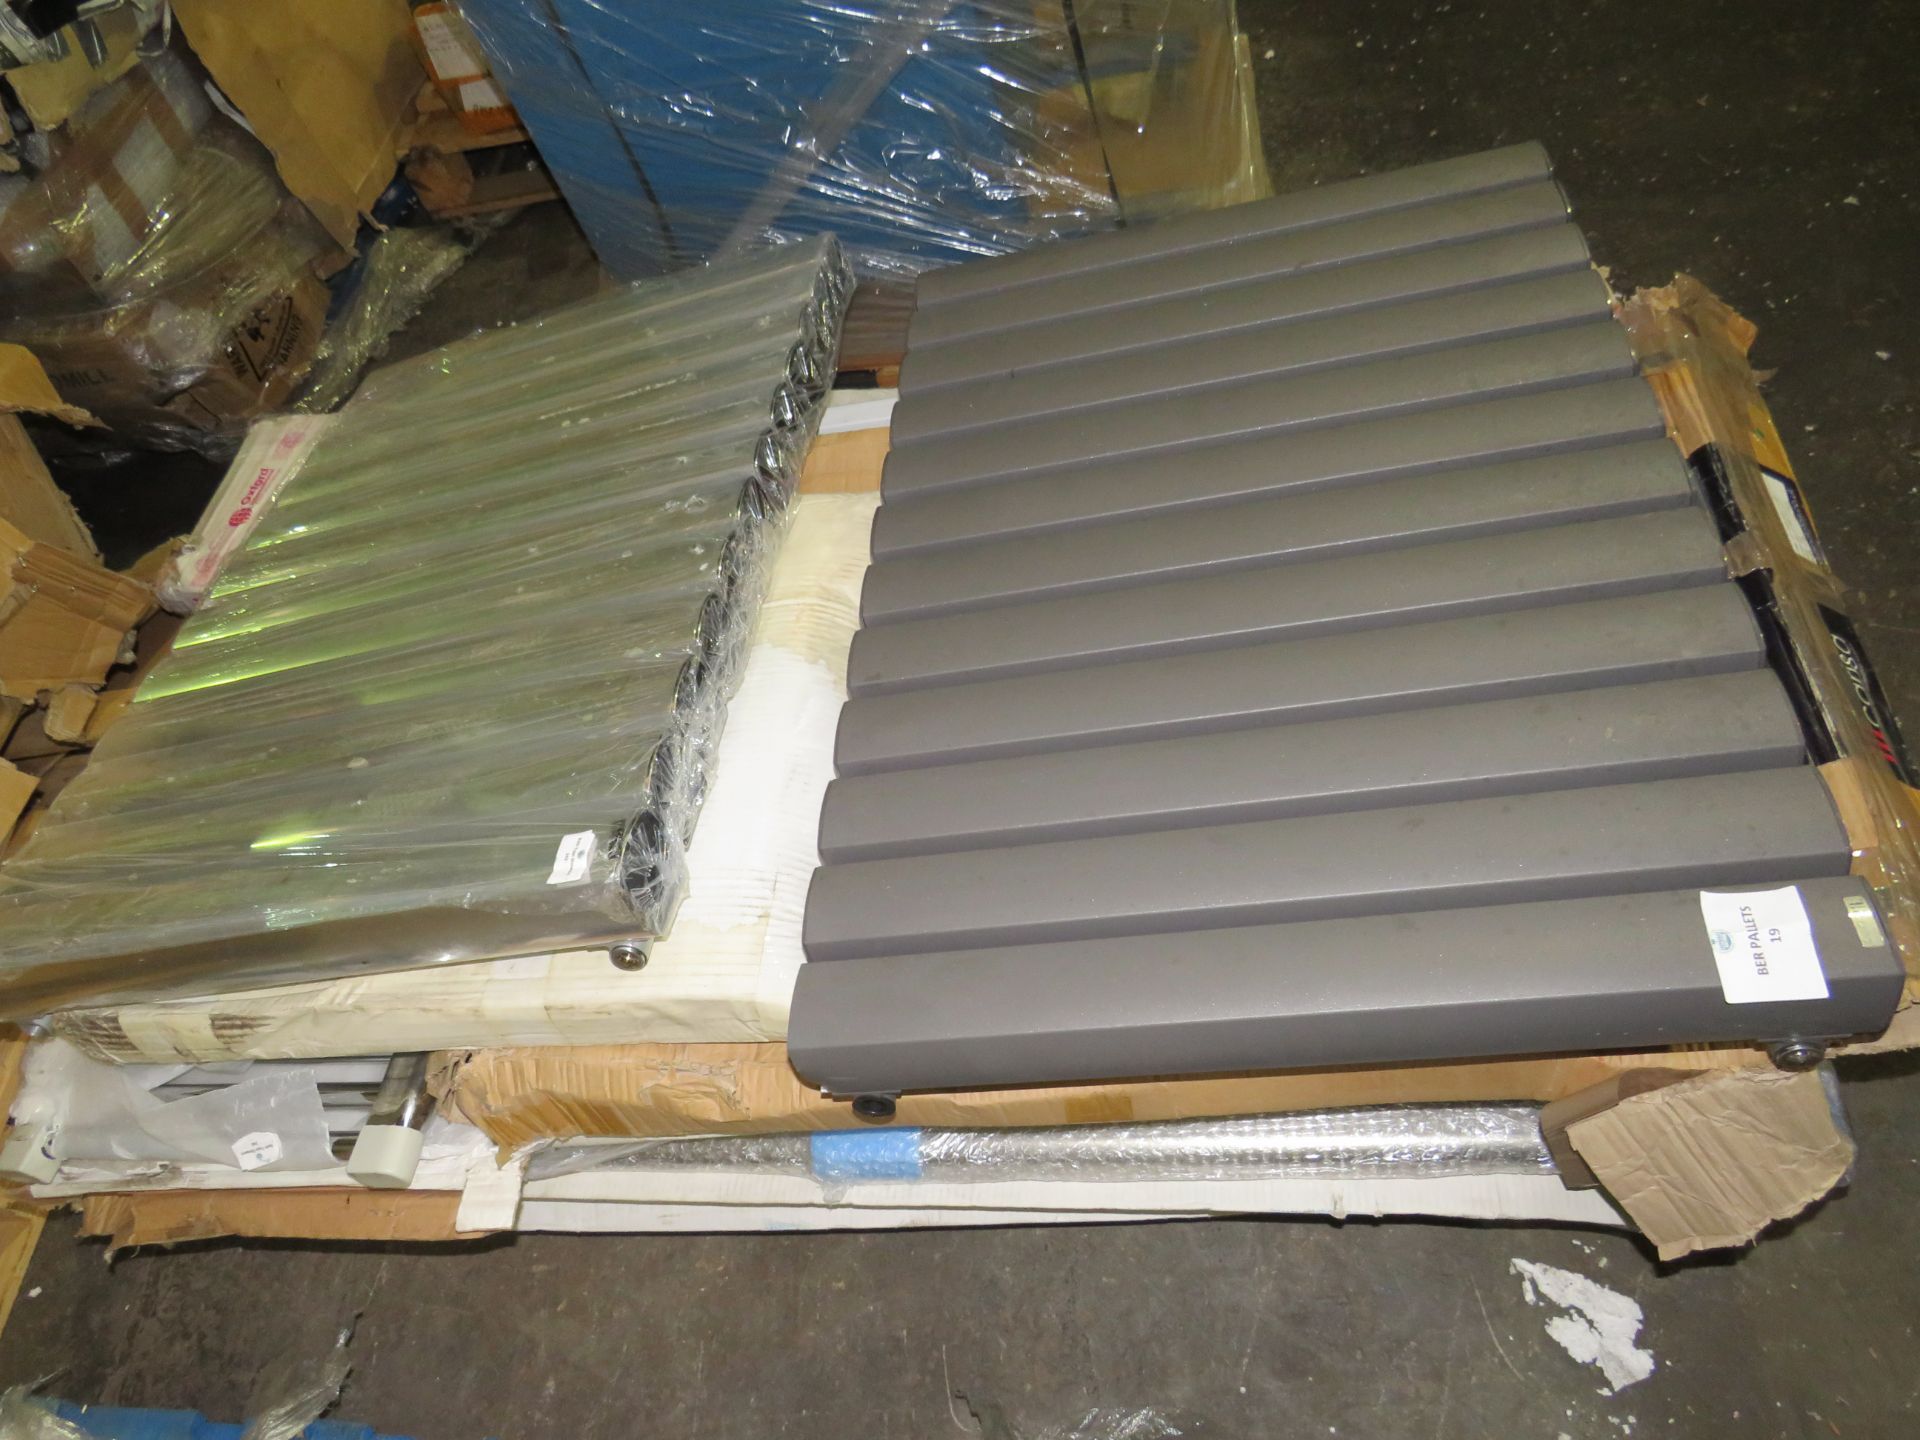 1x Pallet Containing Approx 8 Radiators - All May Be Damaged Or Have Defects - Packaging May Not - Image 2 of 2